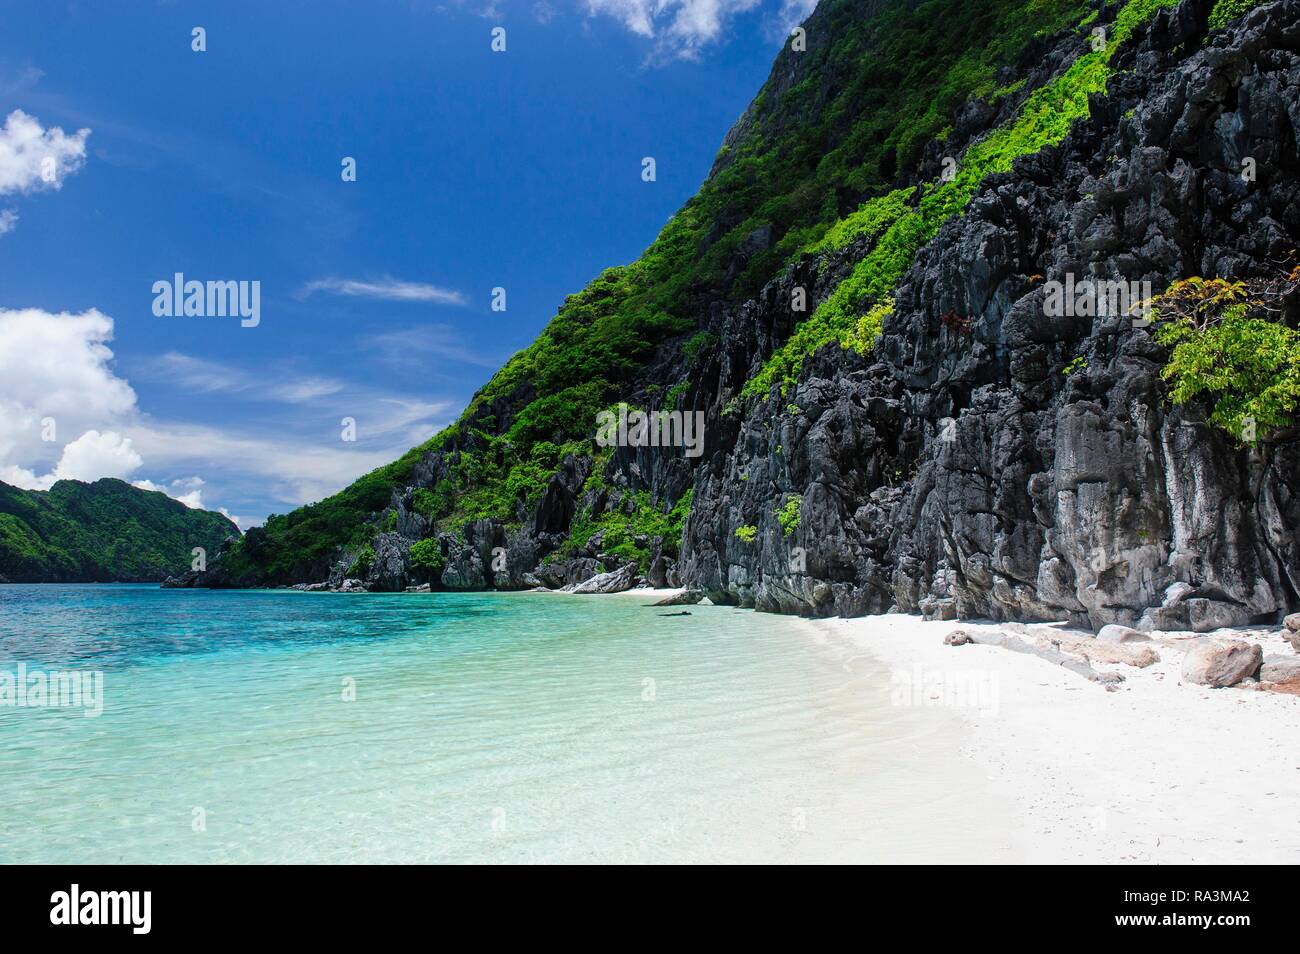 Little white sand beach in the clear waters of the Bacuit archipelago, Palawan, Philippines Stock Photo